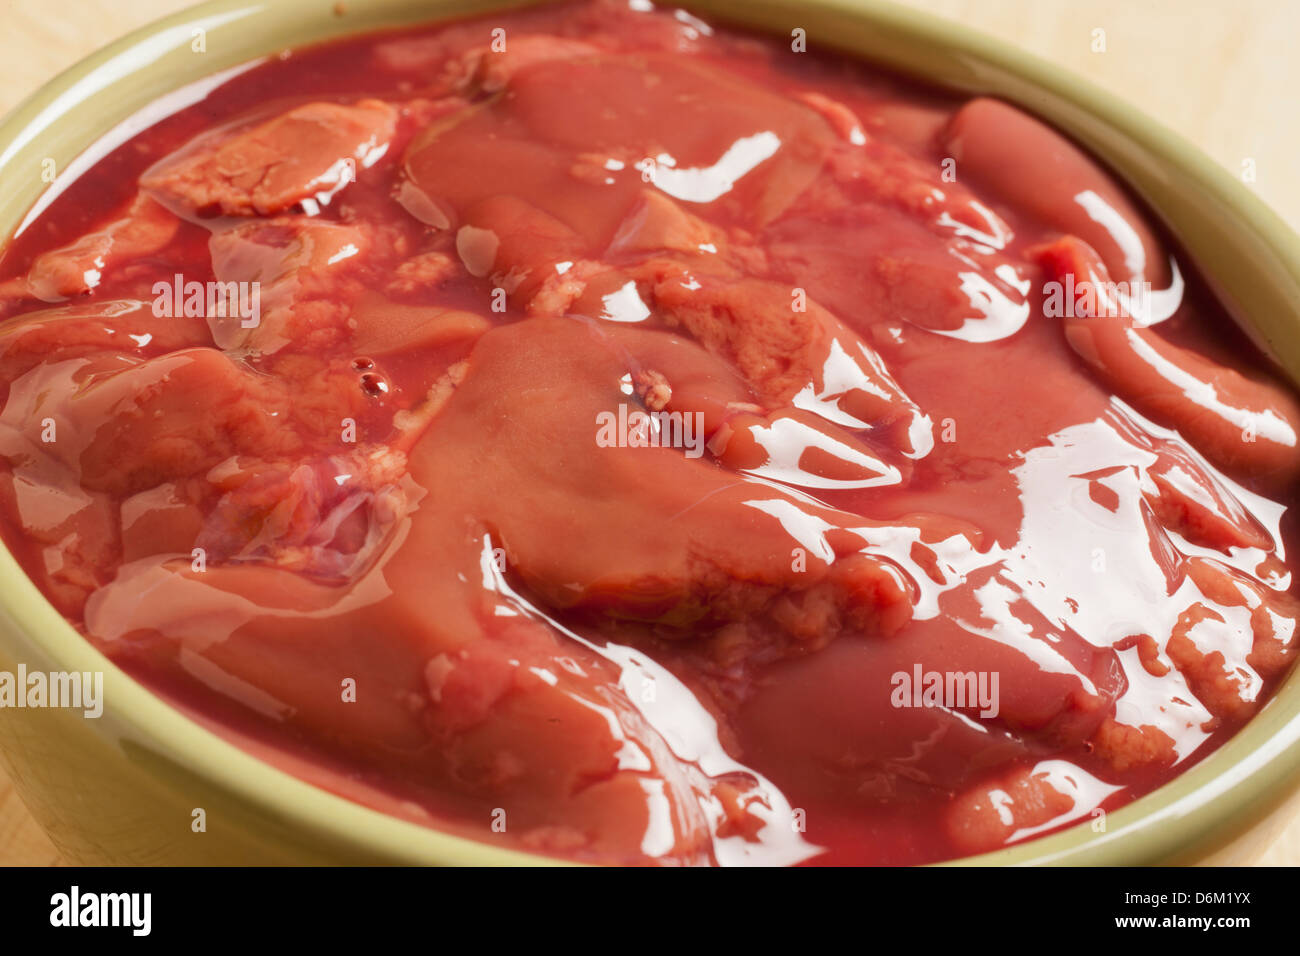 bowl of raw chicken livers Stock Photo